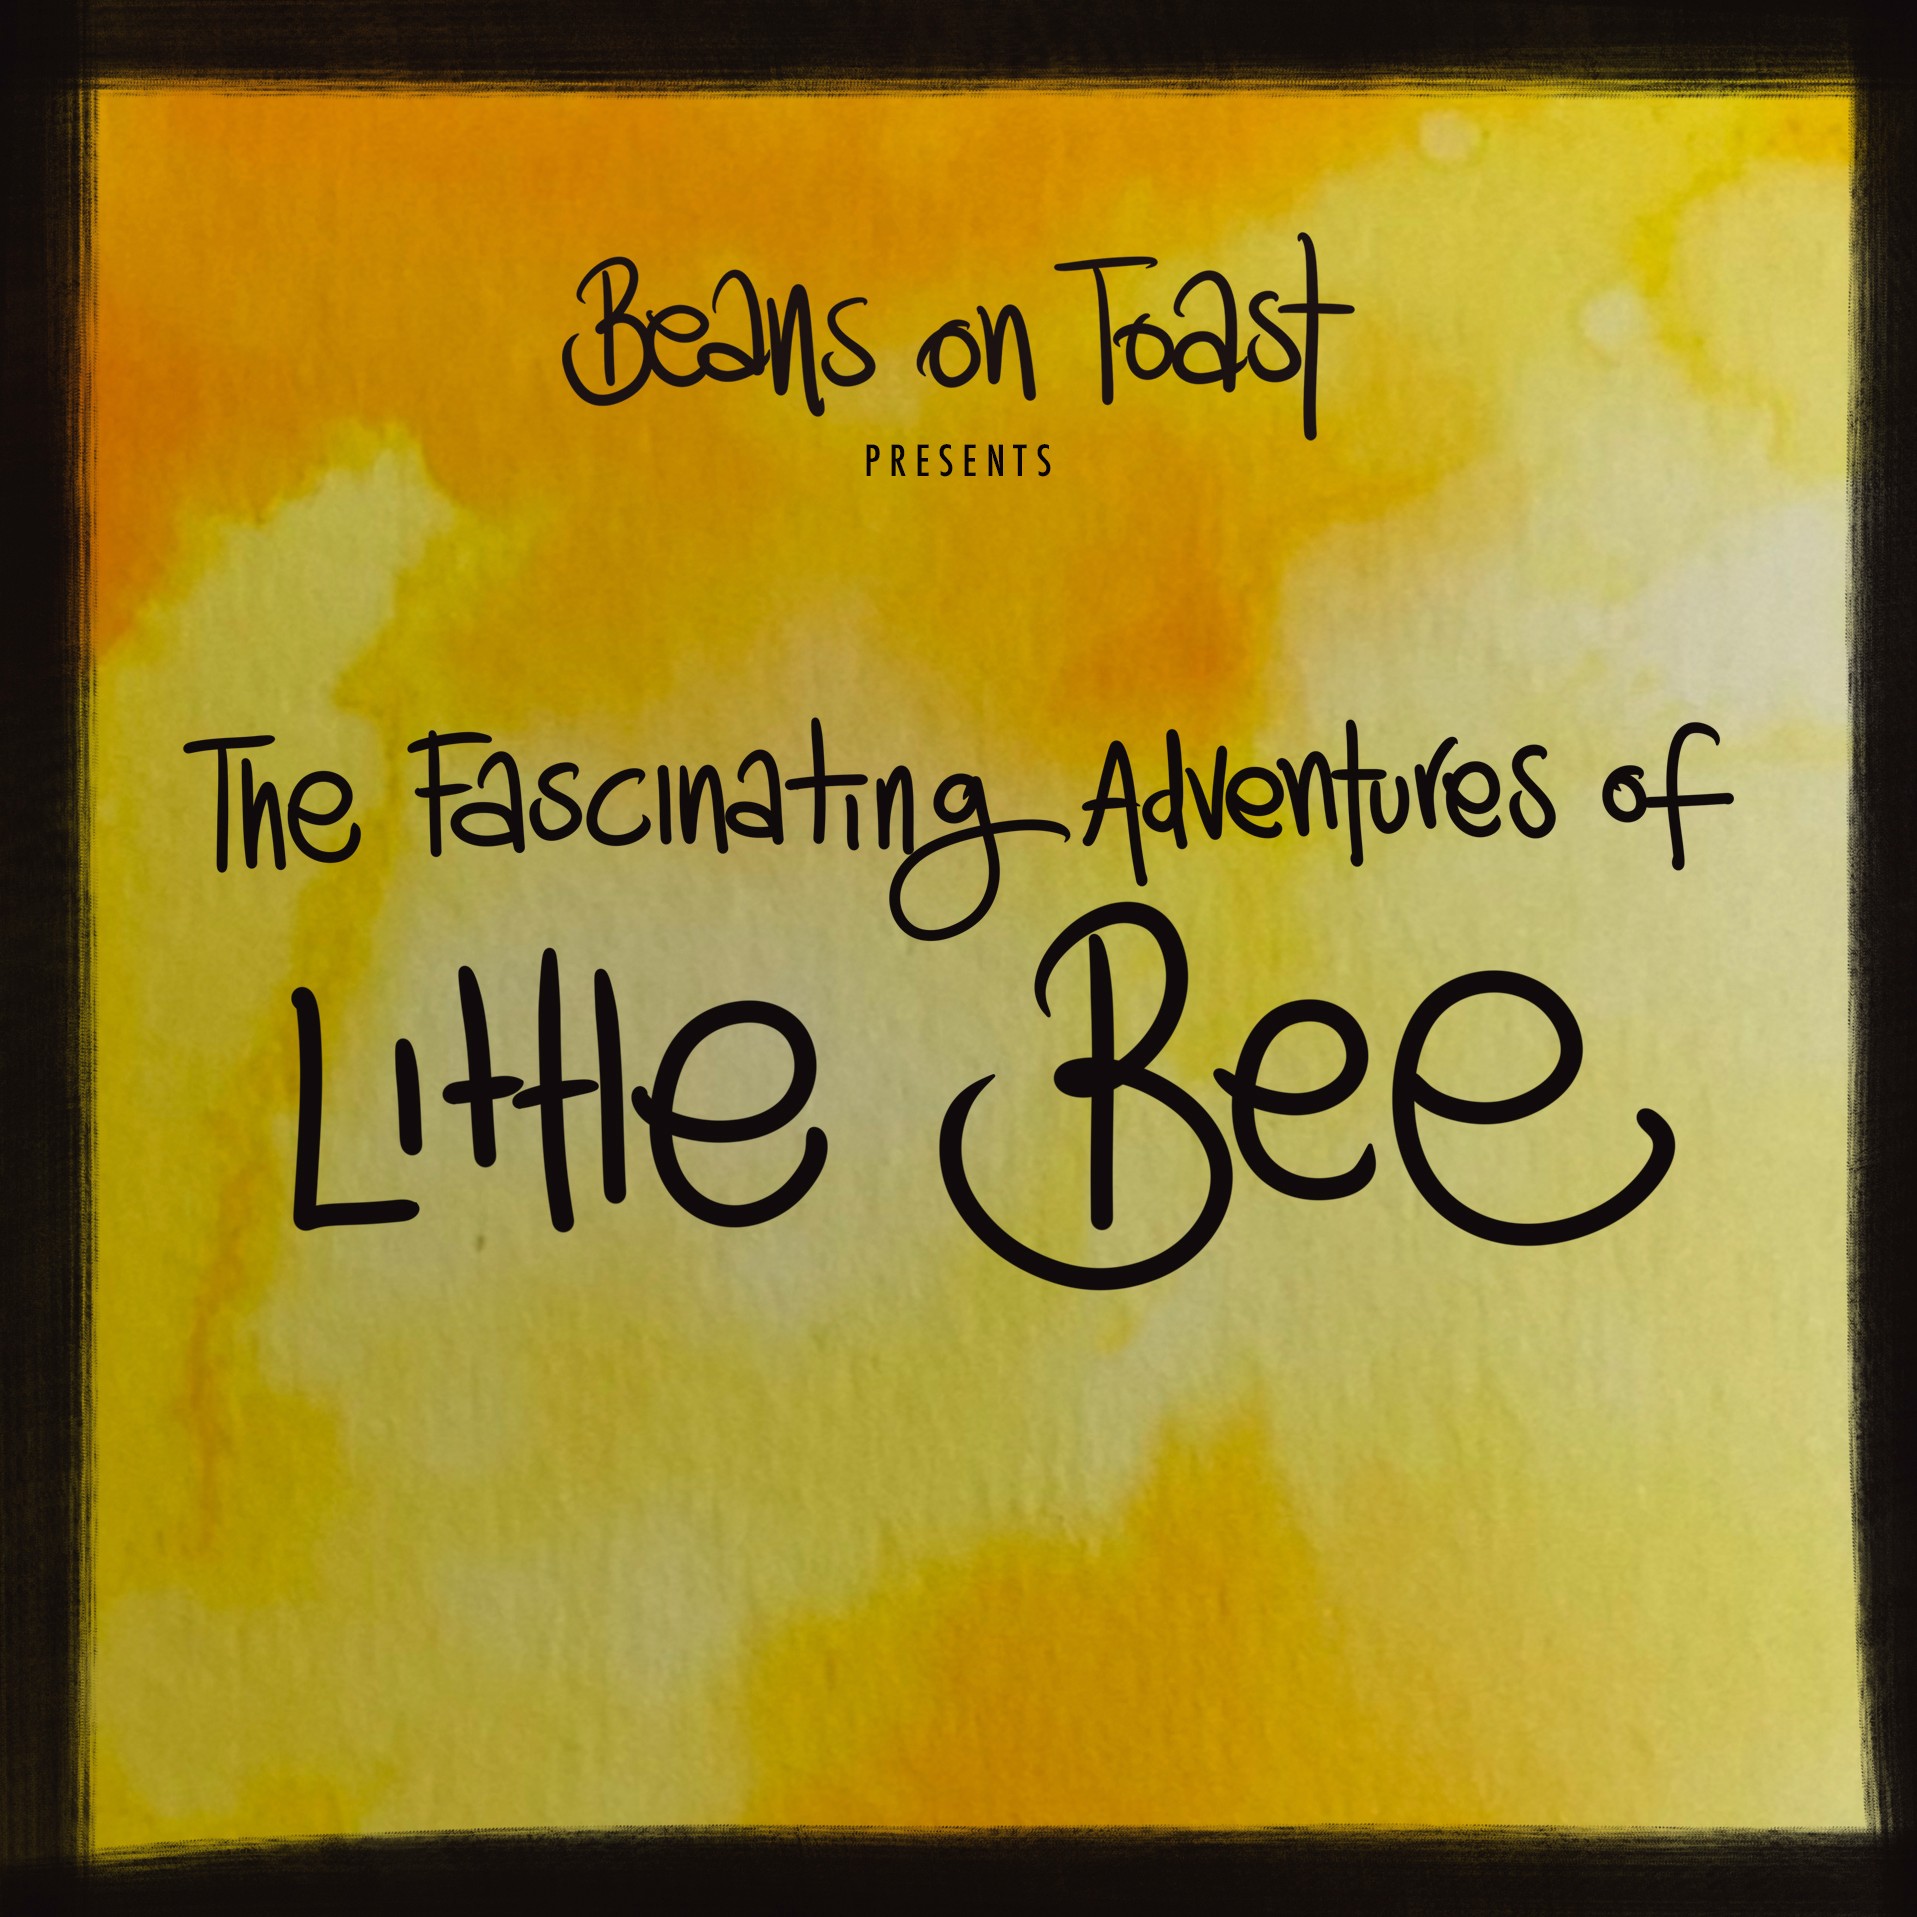 Beans on Toast ‘The Fascinating Adventures of Little Bee’ album/book series cover